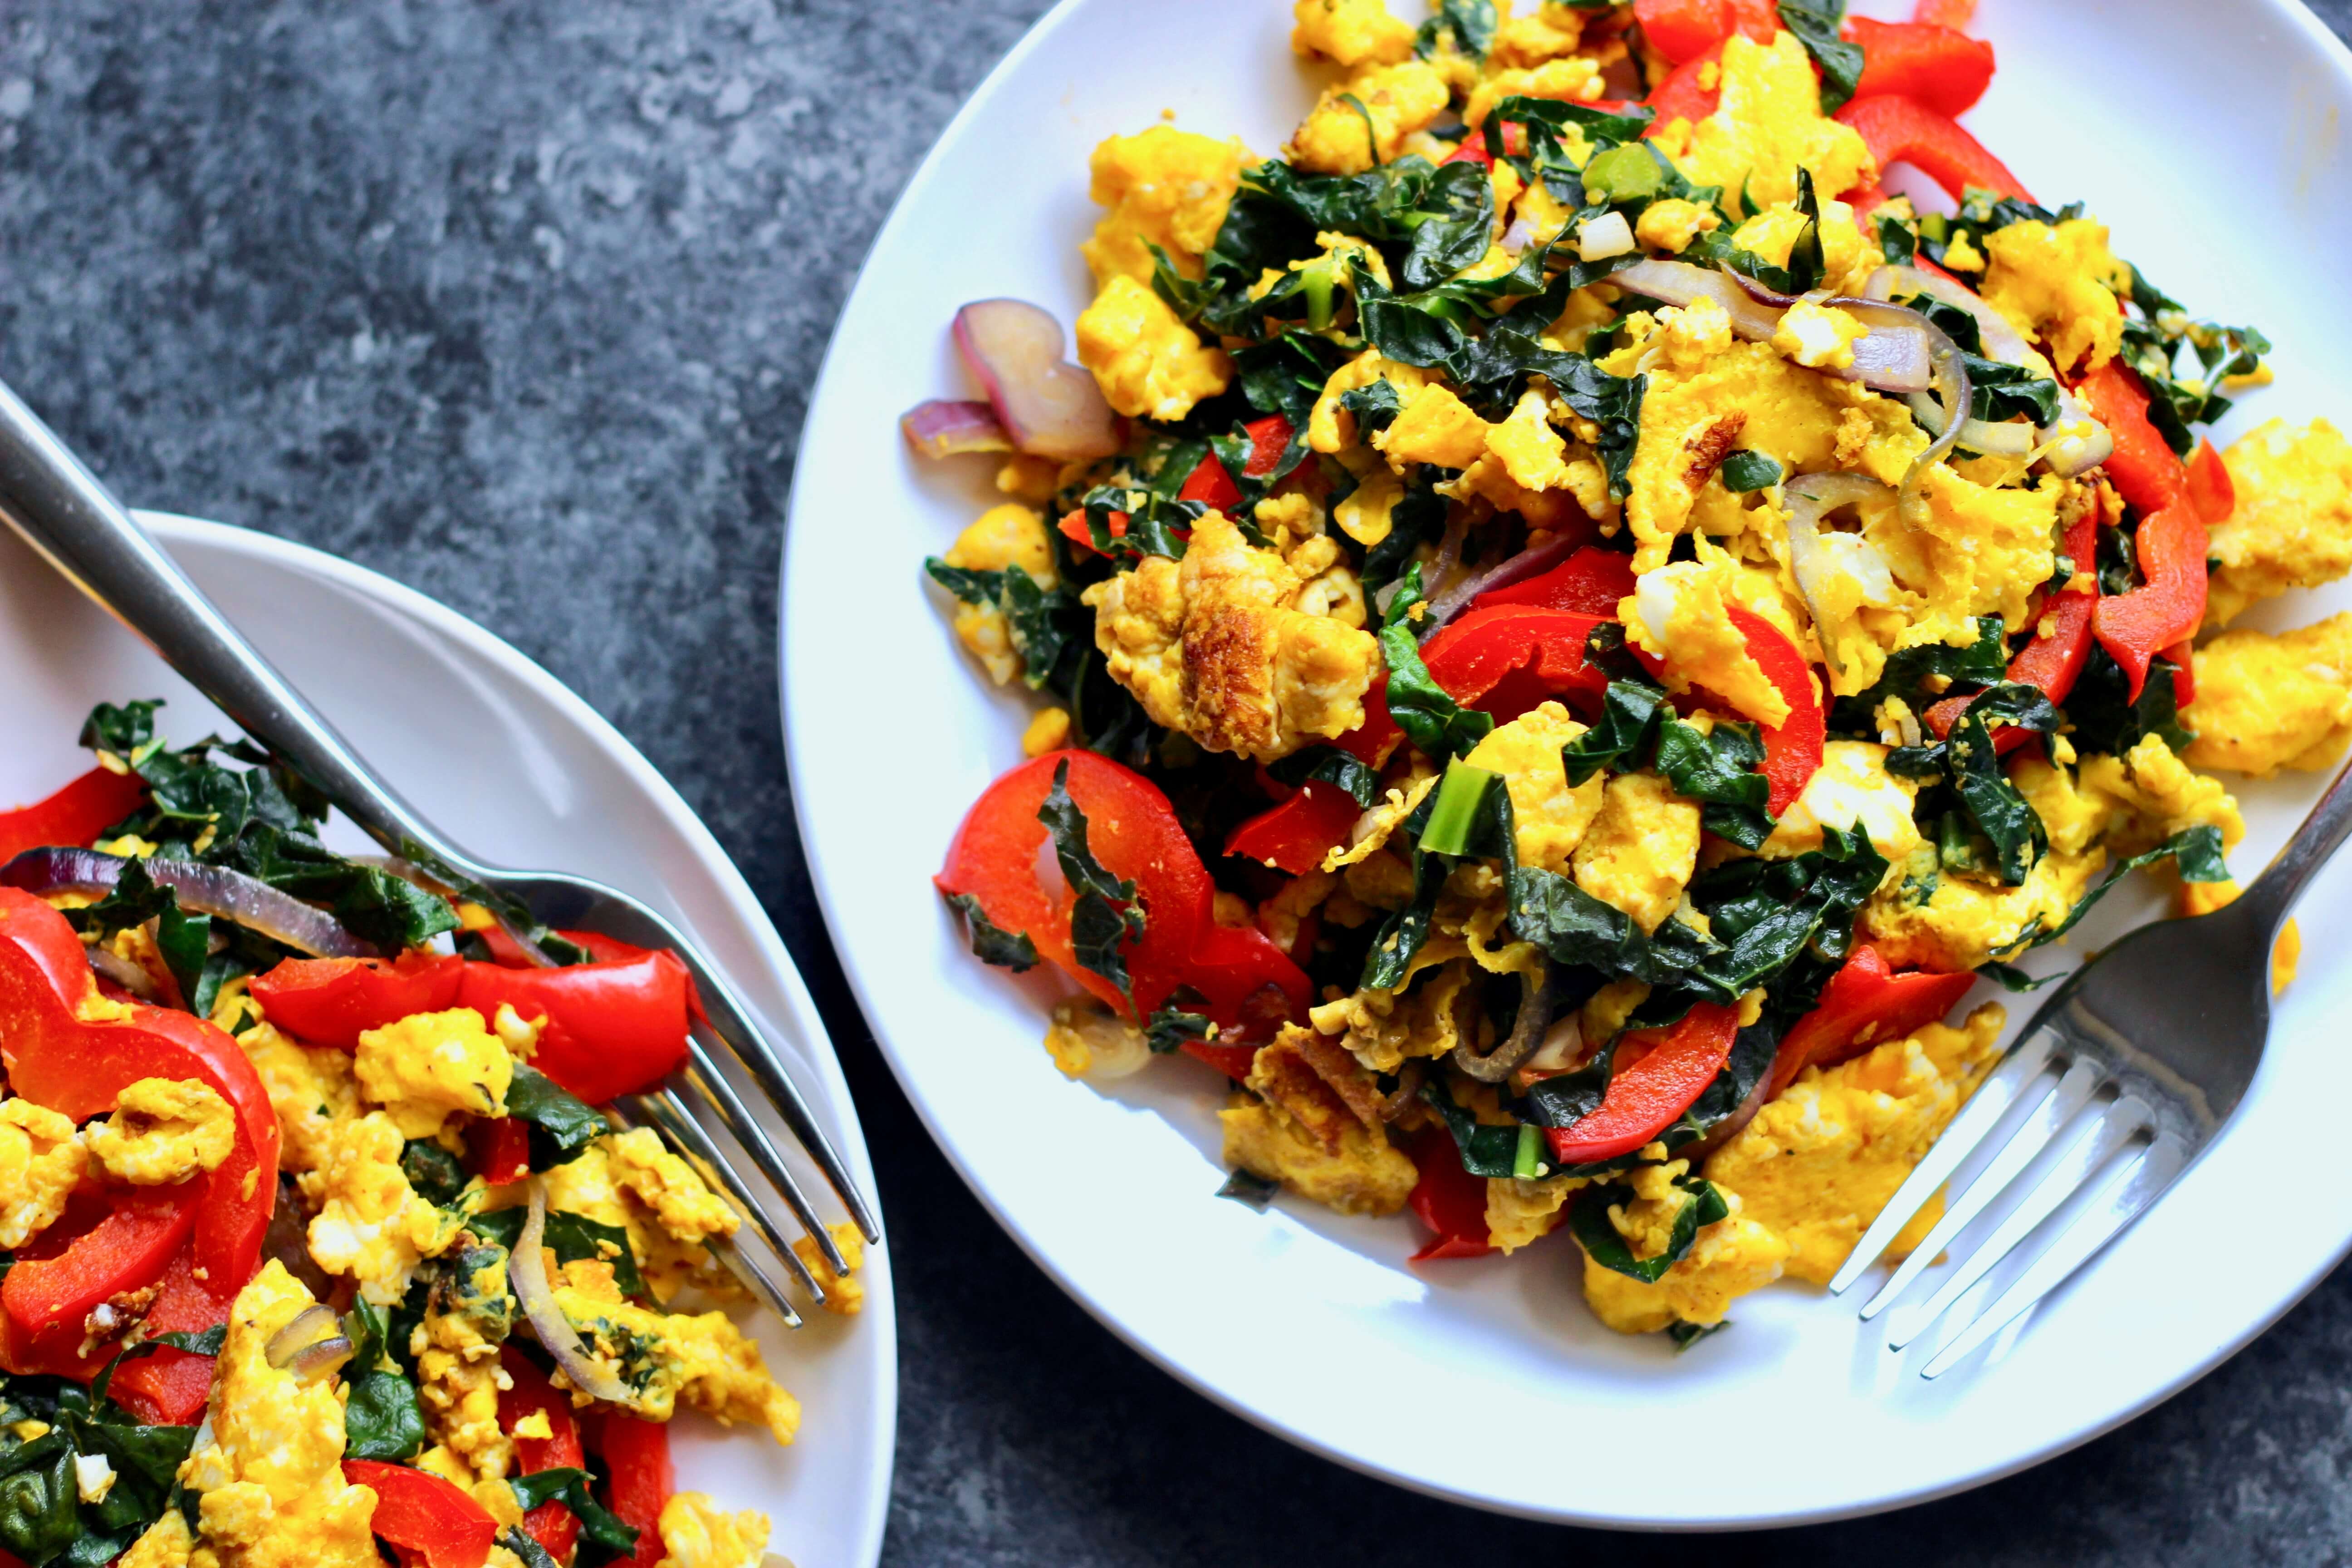 20 Meal Ideas to Help Clients Manage Arthritis: Scrambled Eggs with Peppers & Kale